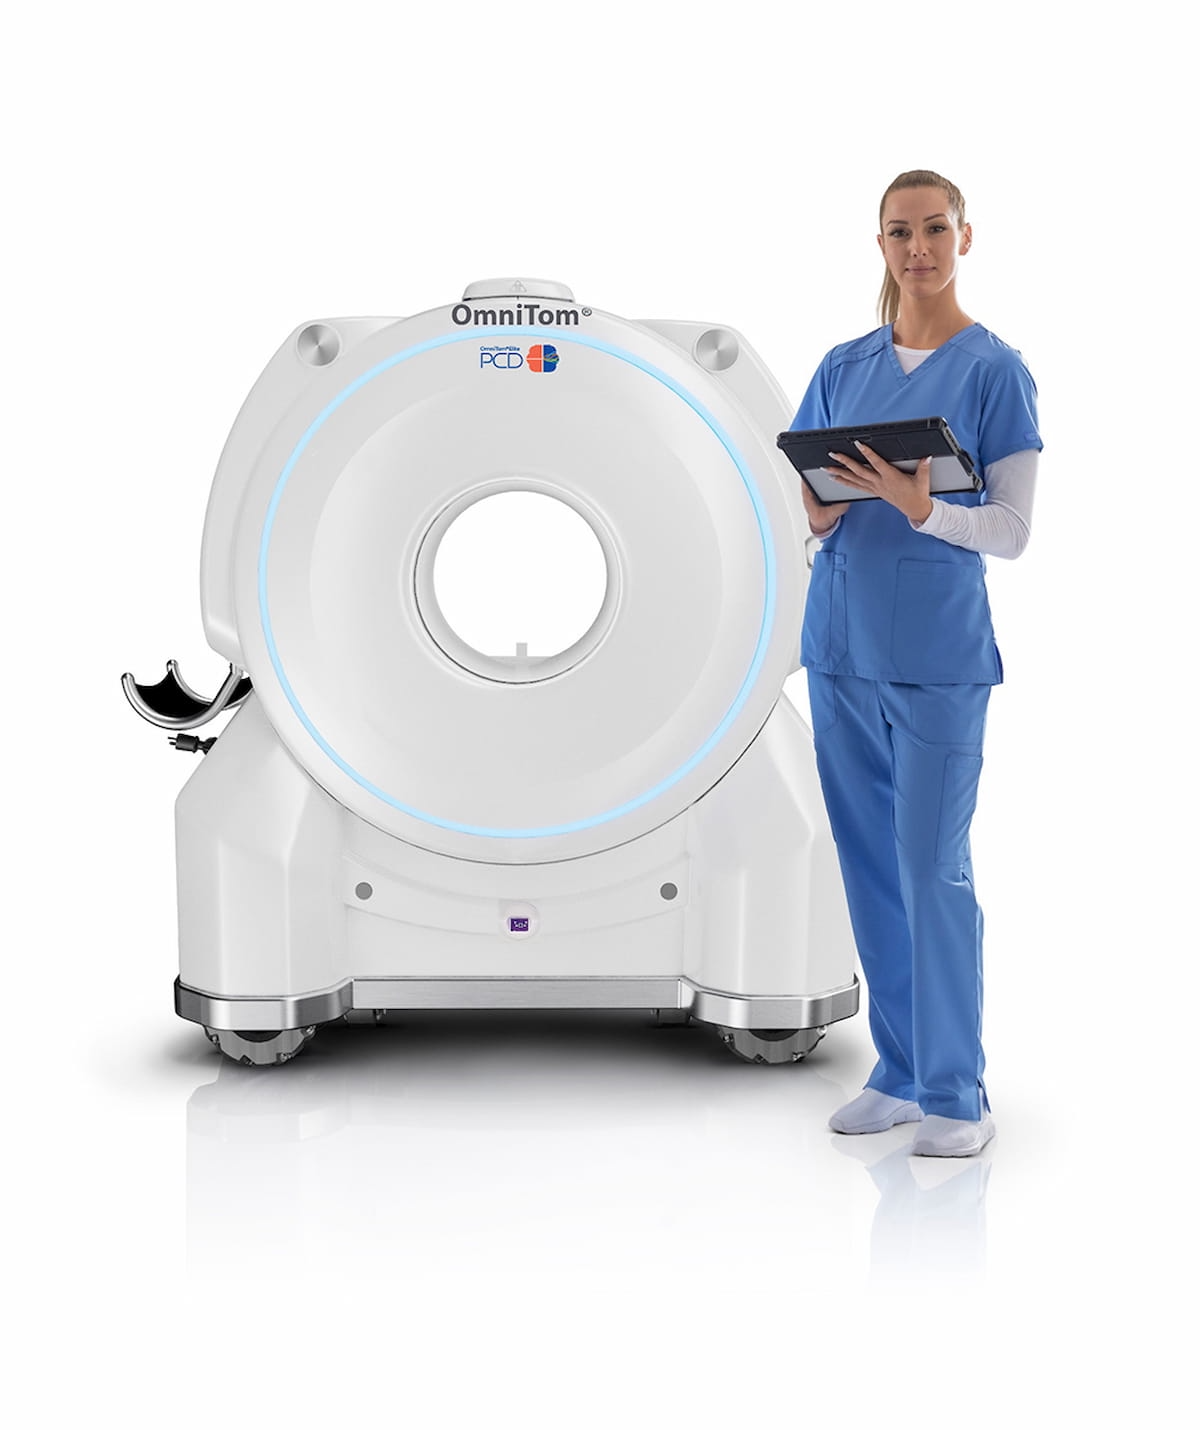 FDA Clears Enhanced Mobile CT System with High-Resolution Photon-Counting Technology